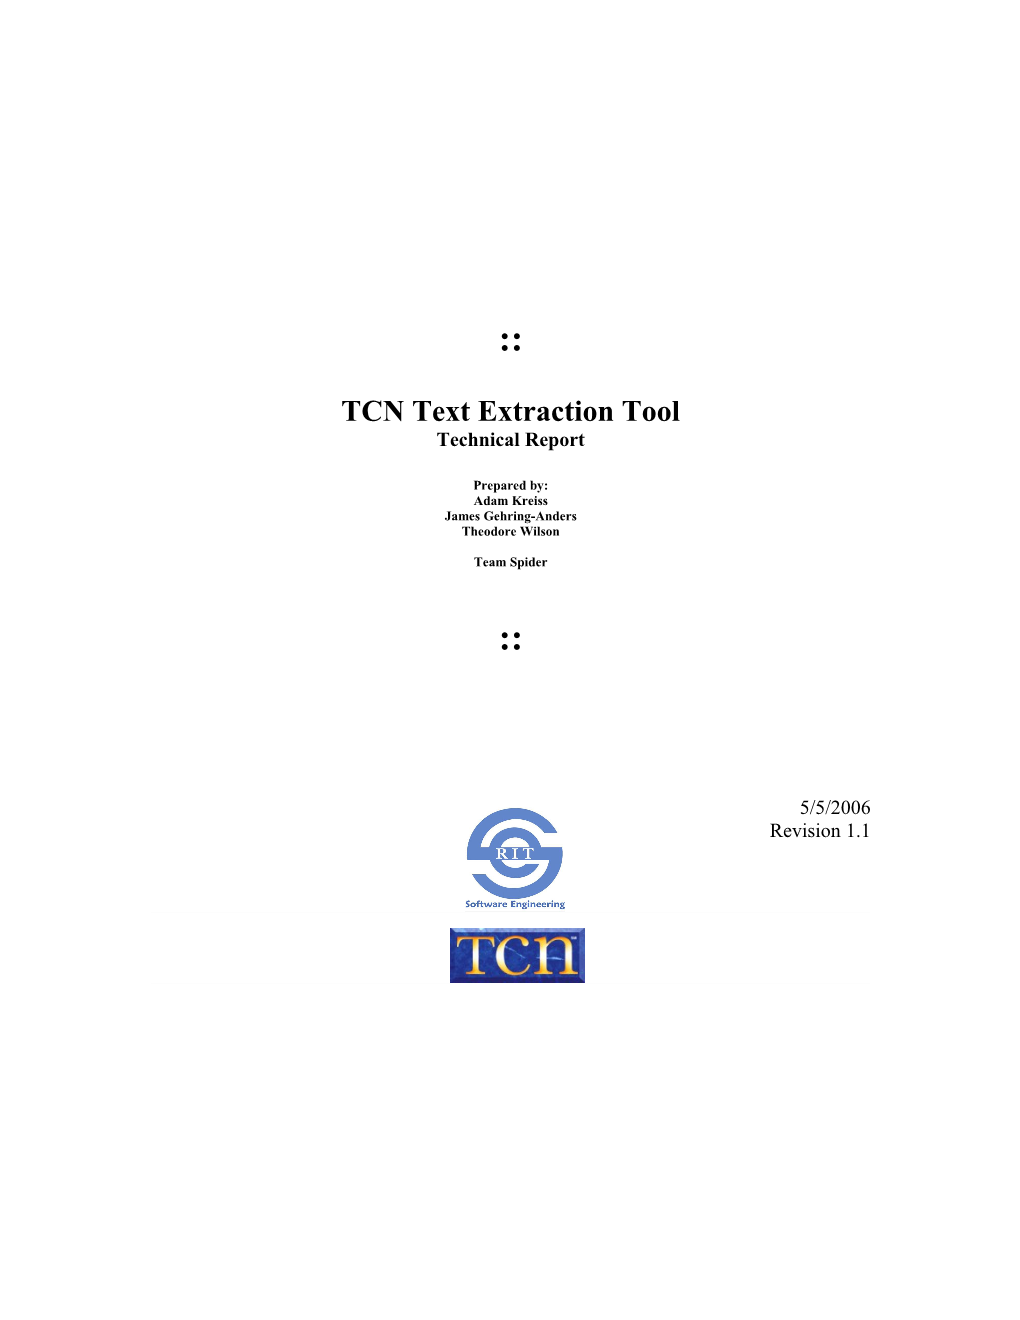 TCN Text Extraction Tool